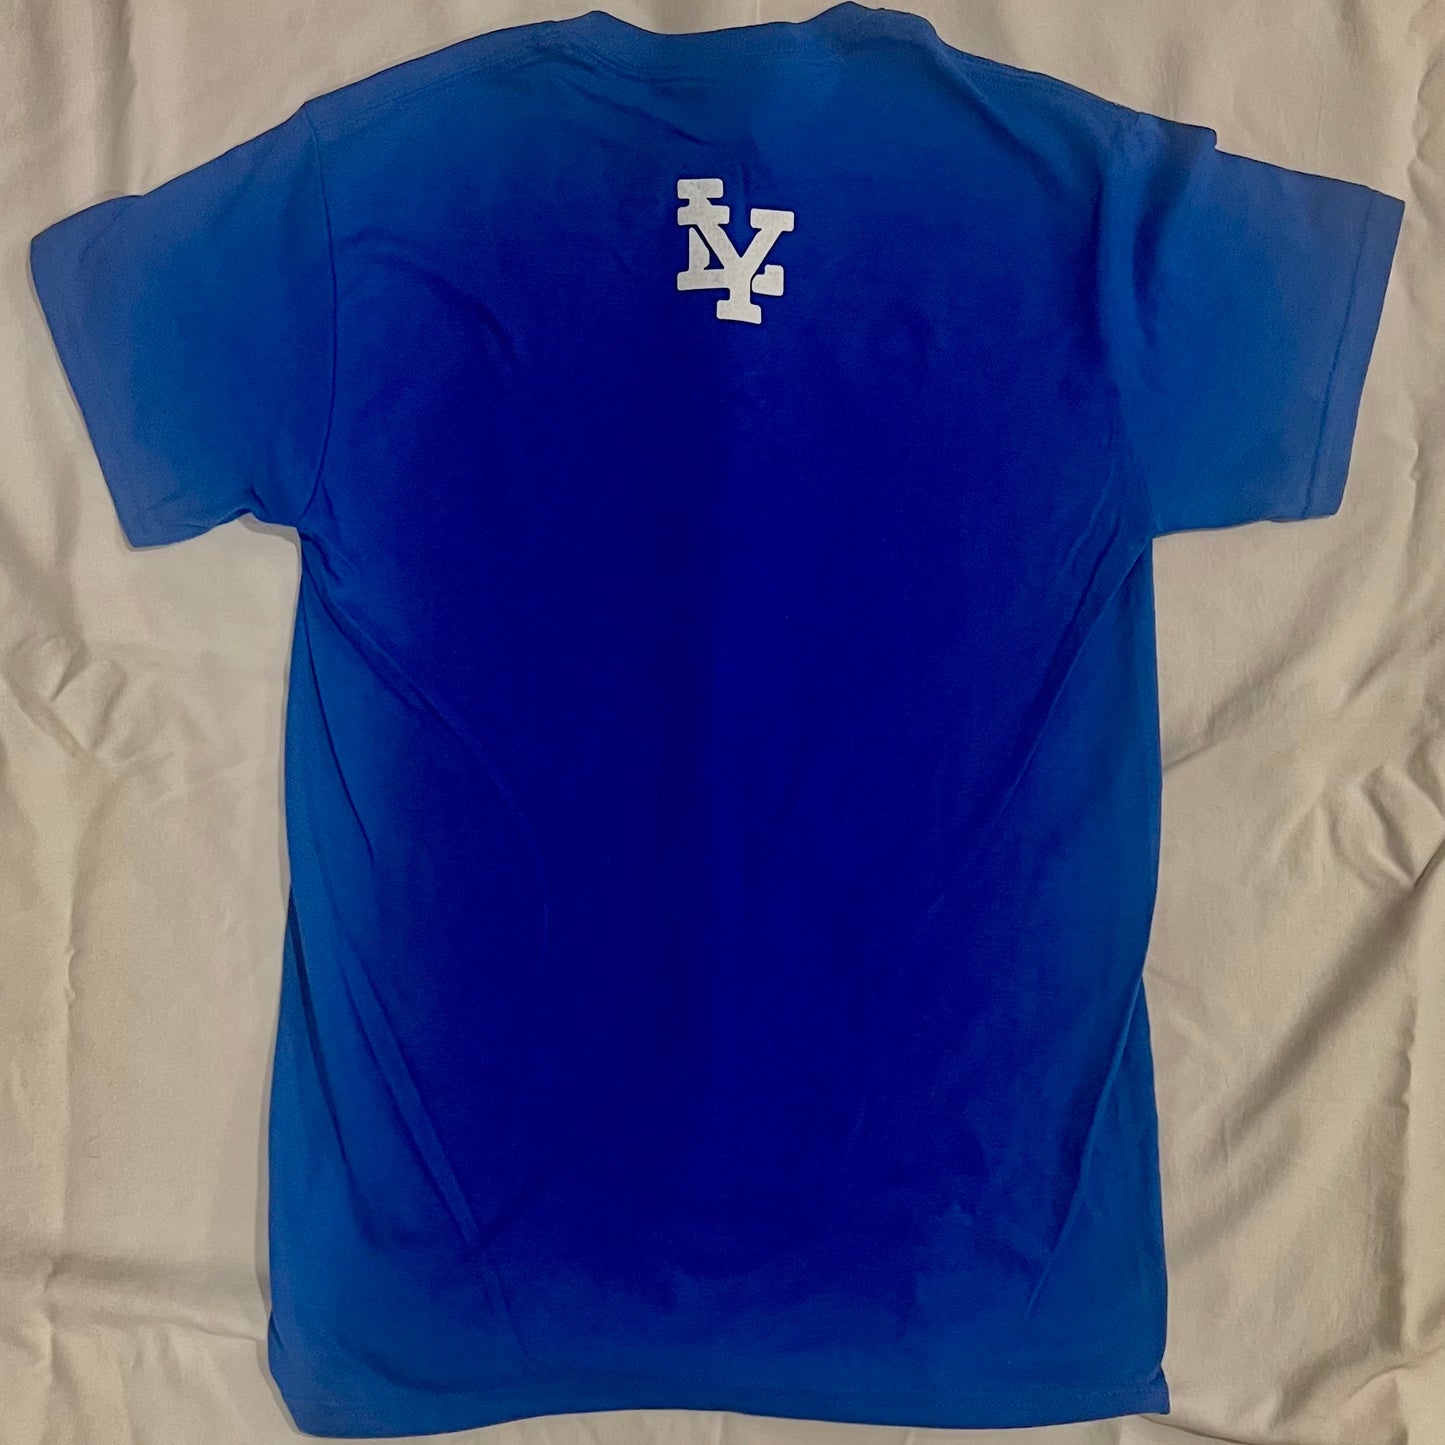 Los Yesterdays Dodgers Tribute Shirt